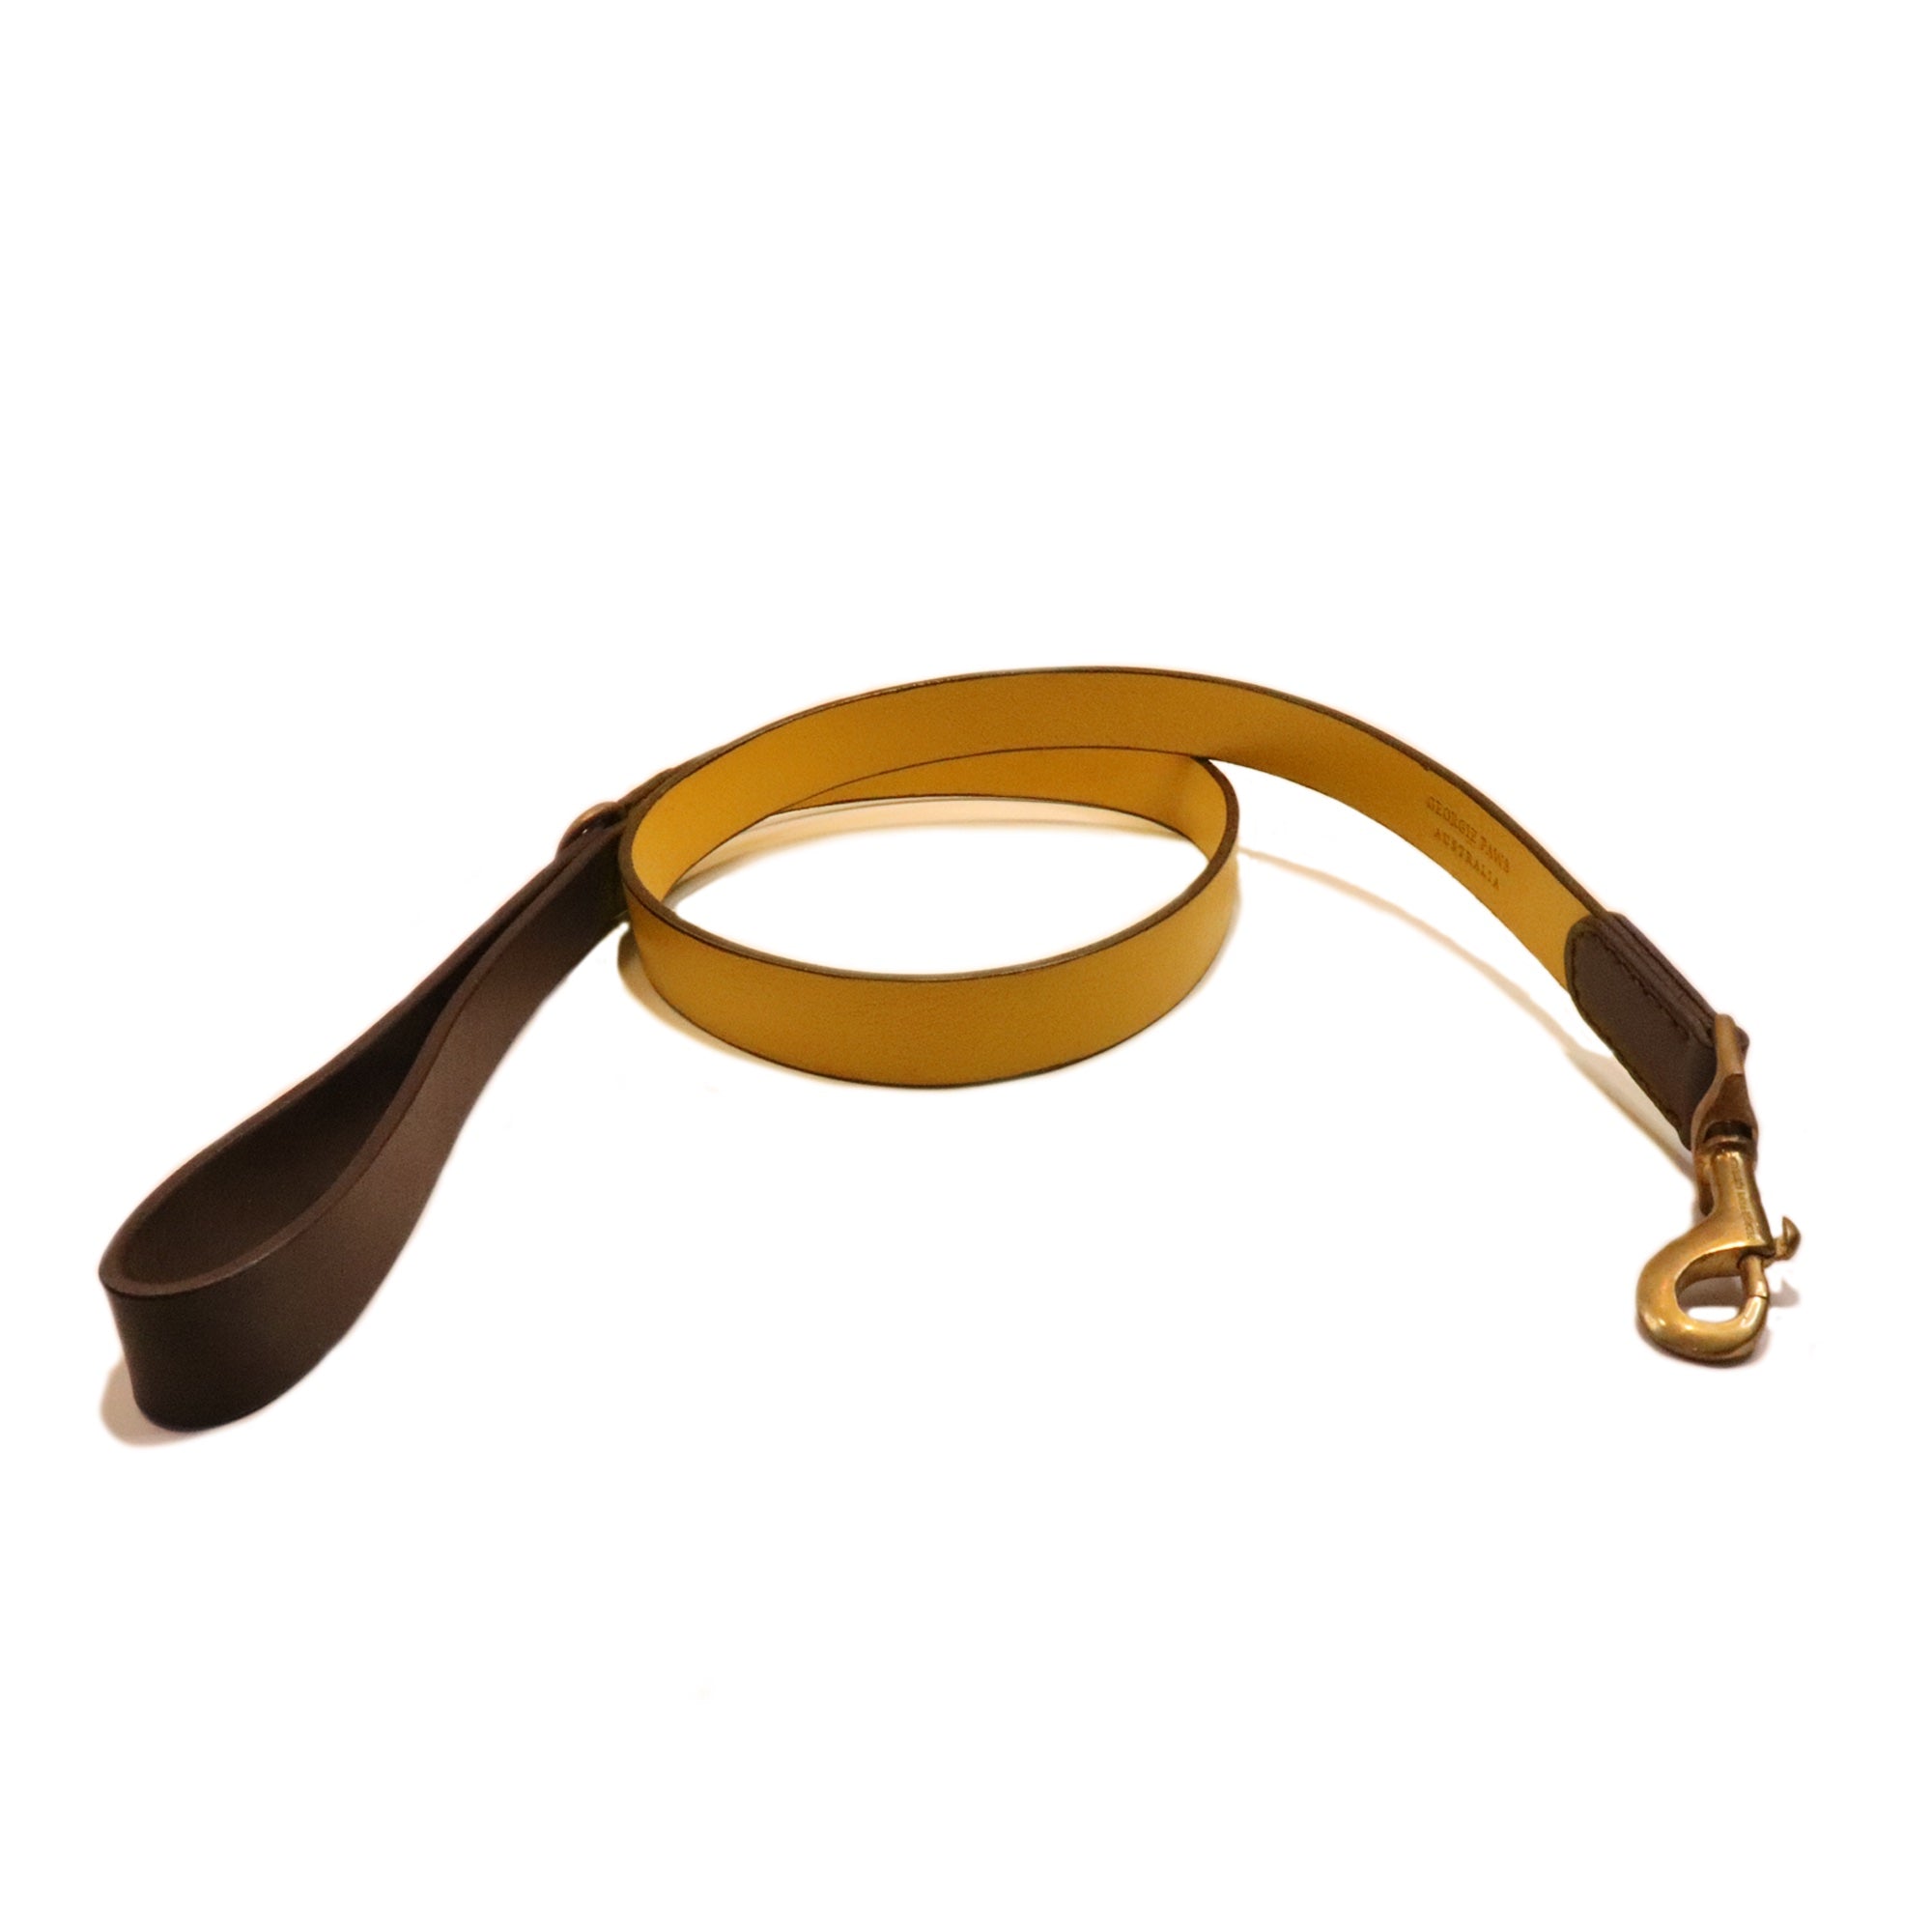 A sustainably made Cooper Lead - wheat with a golden-yellow finish and a contrasting brown handle, featuring a metal clasp, coiled neatly on an isolated white background by Georgie Paws.